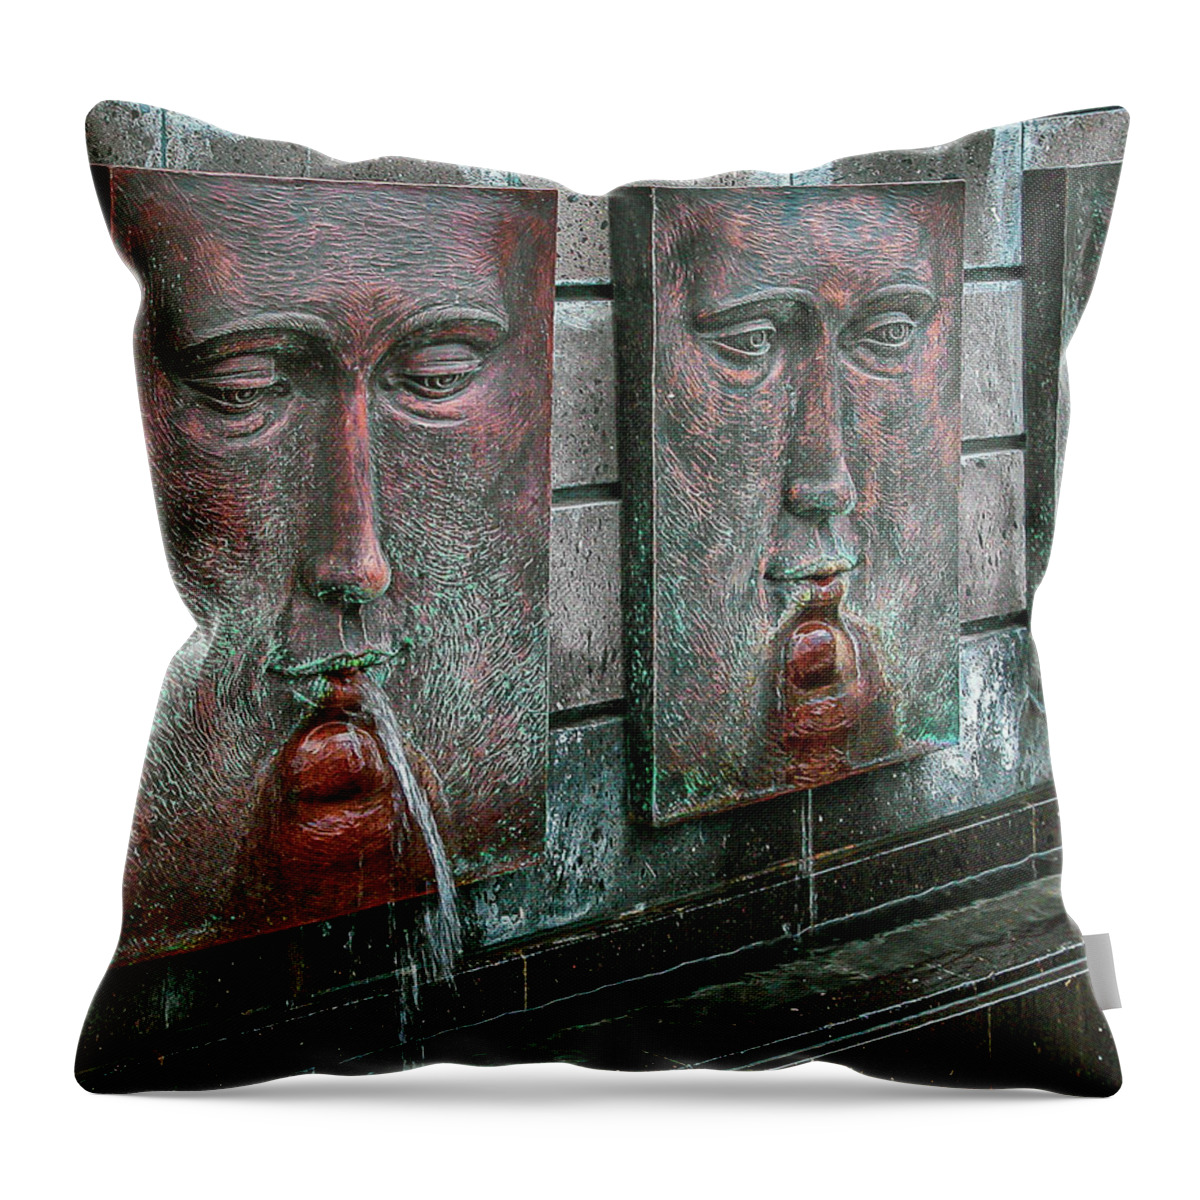 Fountains Throw Pillow featuring the photograph Fountains - Mexico by Frank Mari